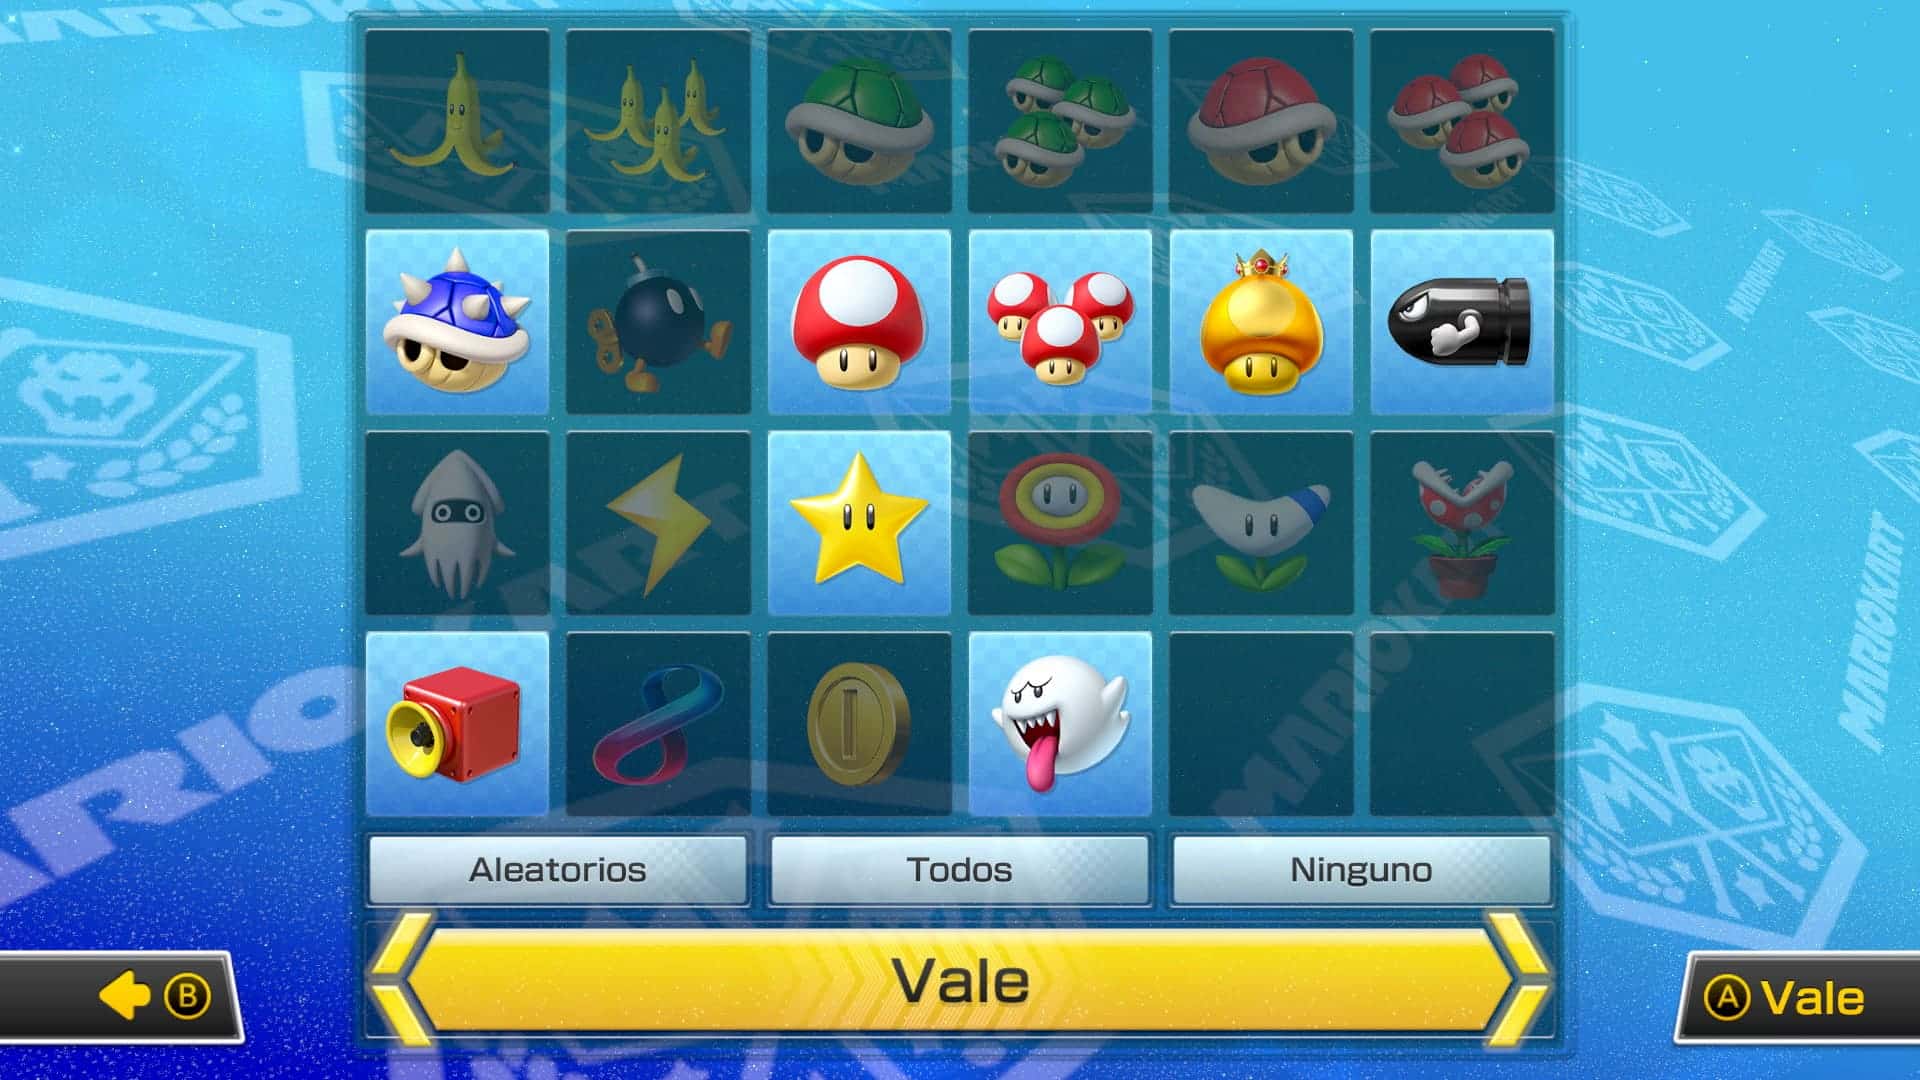 The new Mario Kart 8 Deluxe update includes this custom item option for everyone